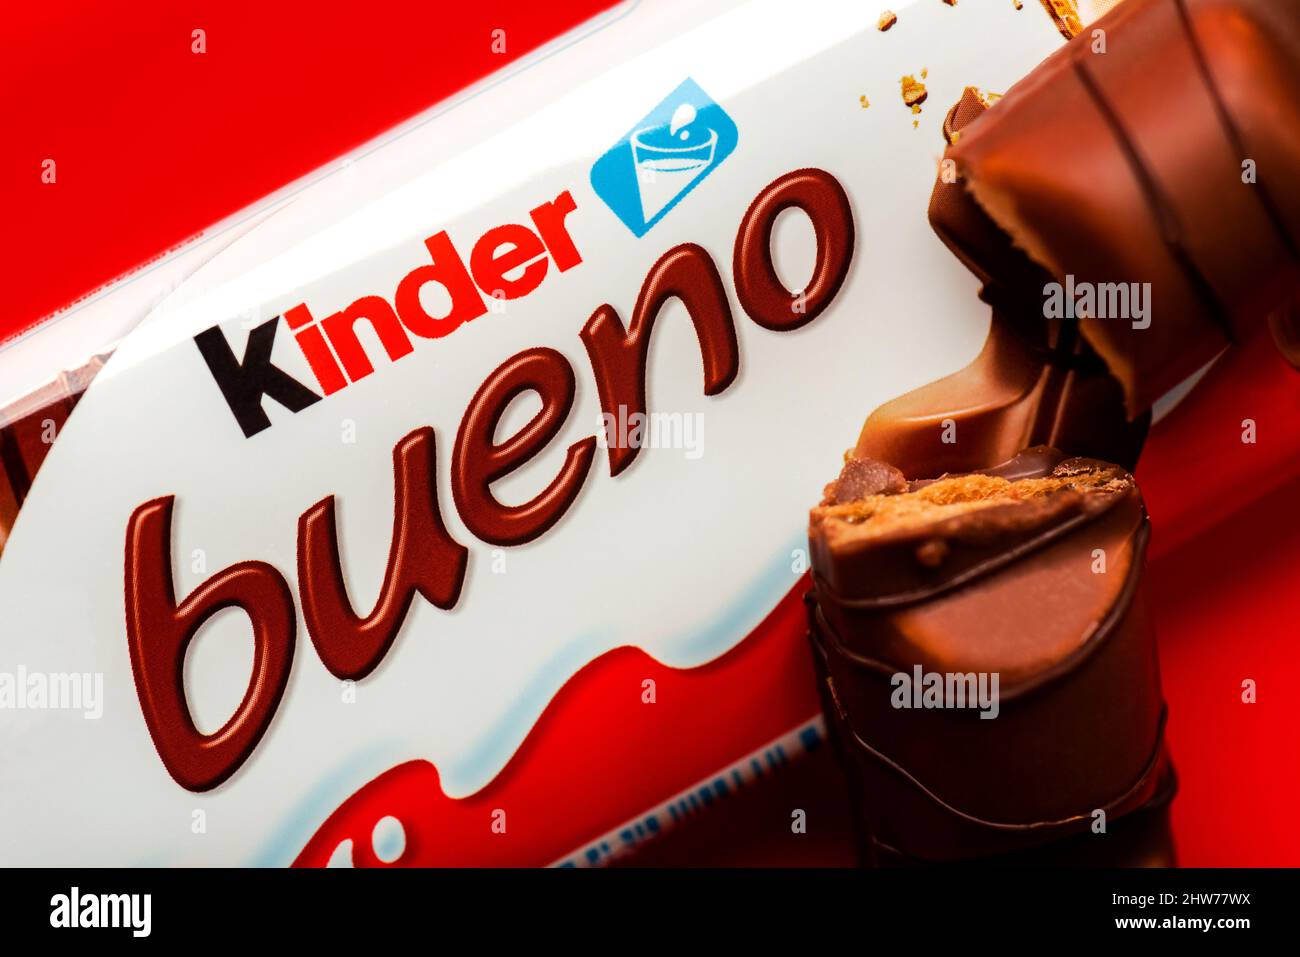 https://c8.alamy.com/comp/2HW77WX/closeup-of-package-of-kinder-bueno-and-kinder-bueno-milk-chocolate-bar-over-red-background-2HW77WX.jpg